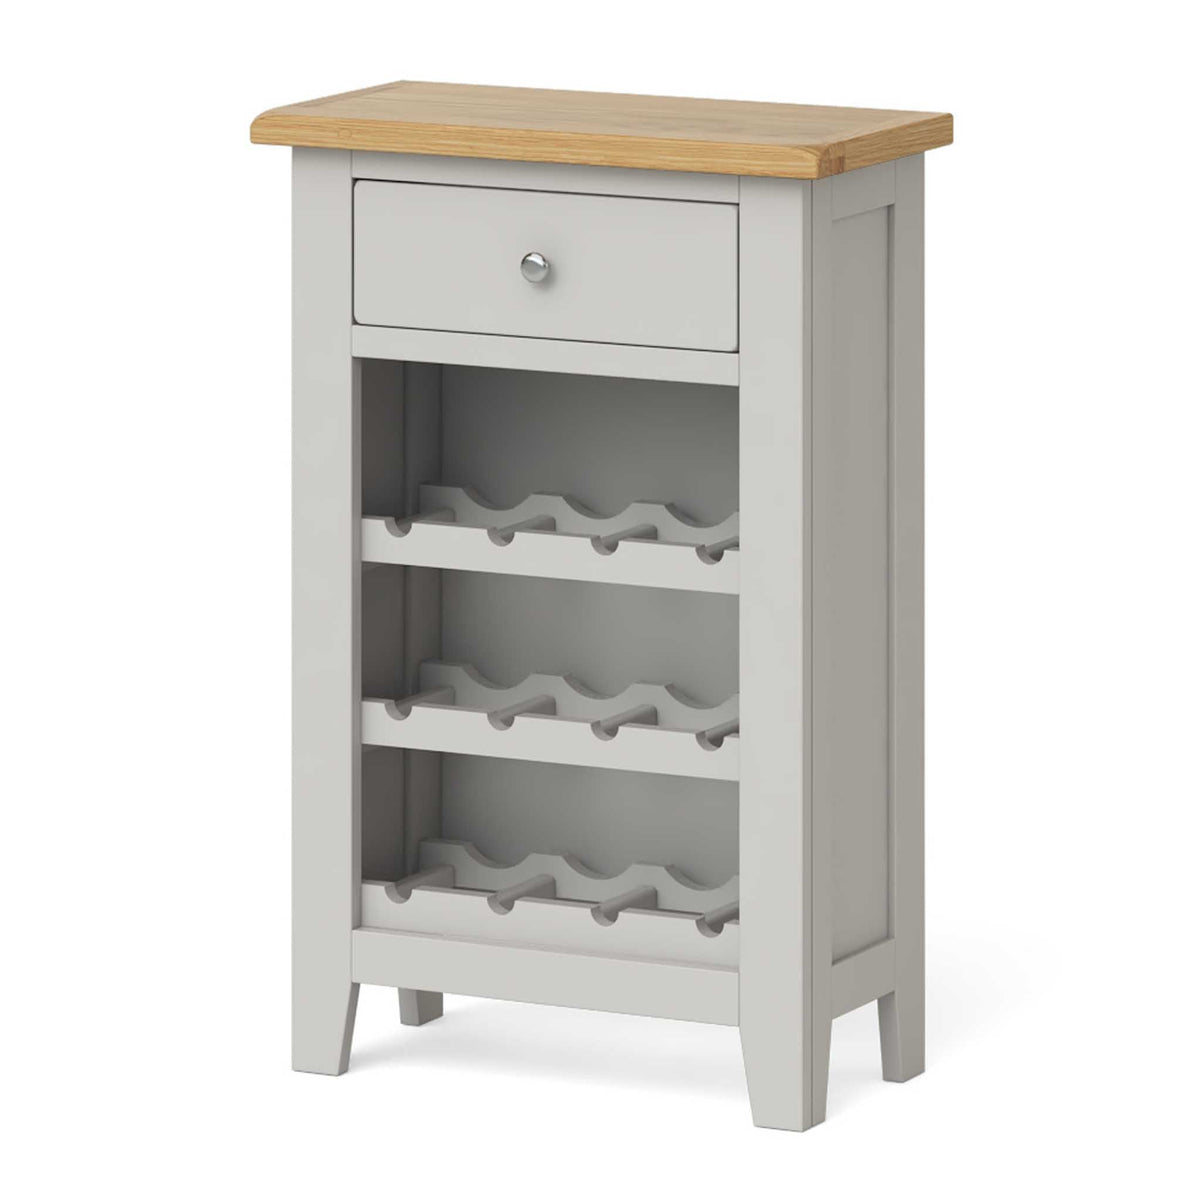 Lundy Grey Wine Rack Cabinet - Side view